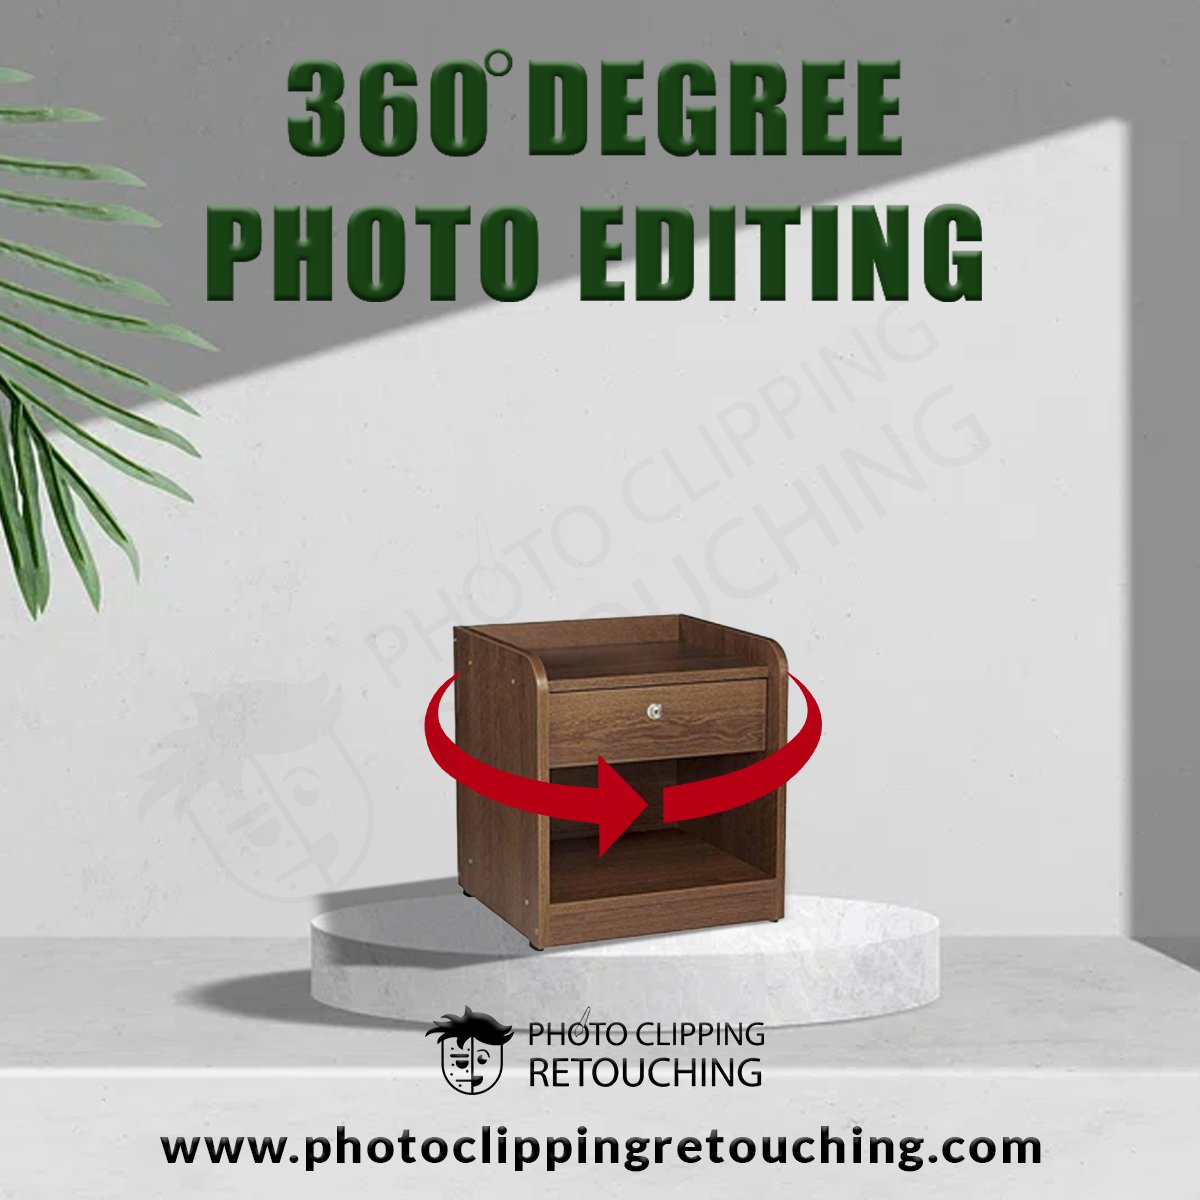 Experience the difference a 360° edit can make. Transform your images and leave a lasting impression! #360DegreeEditing #360PhotoCrafting #360Visual #PhotoEditing #EditingServices #GraphicDesign #PCRgraphics Email: info@photoclippingretouching.com Link: photoclippingretouching.com/360-Degree-pro…